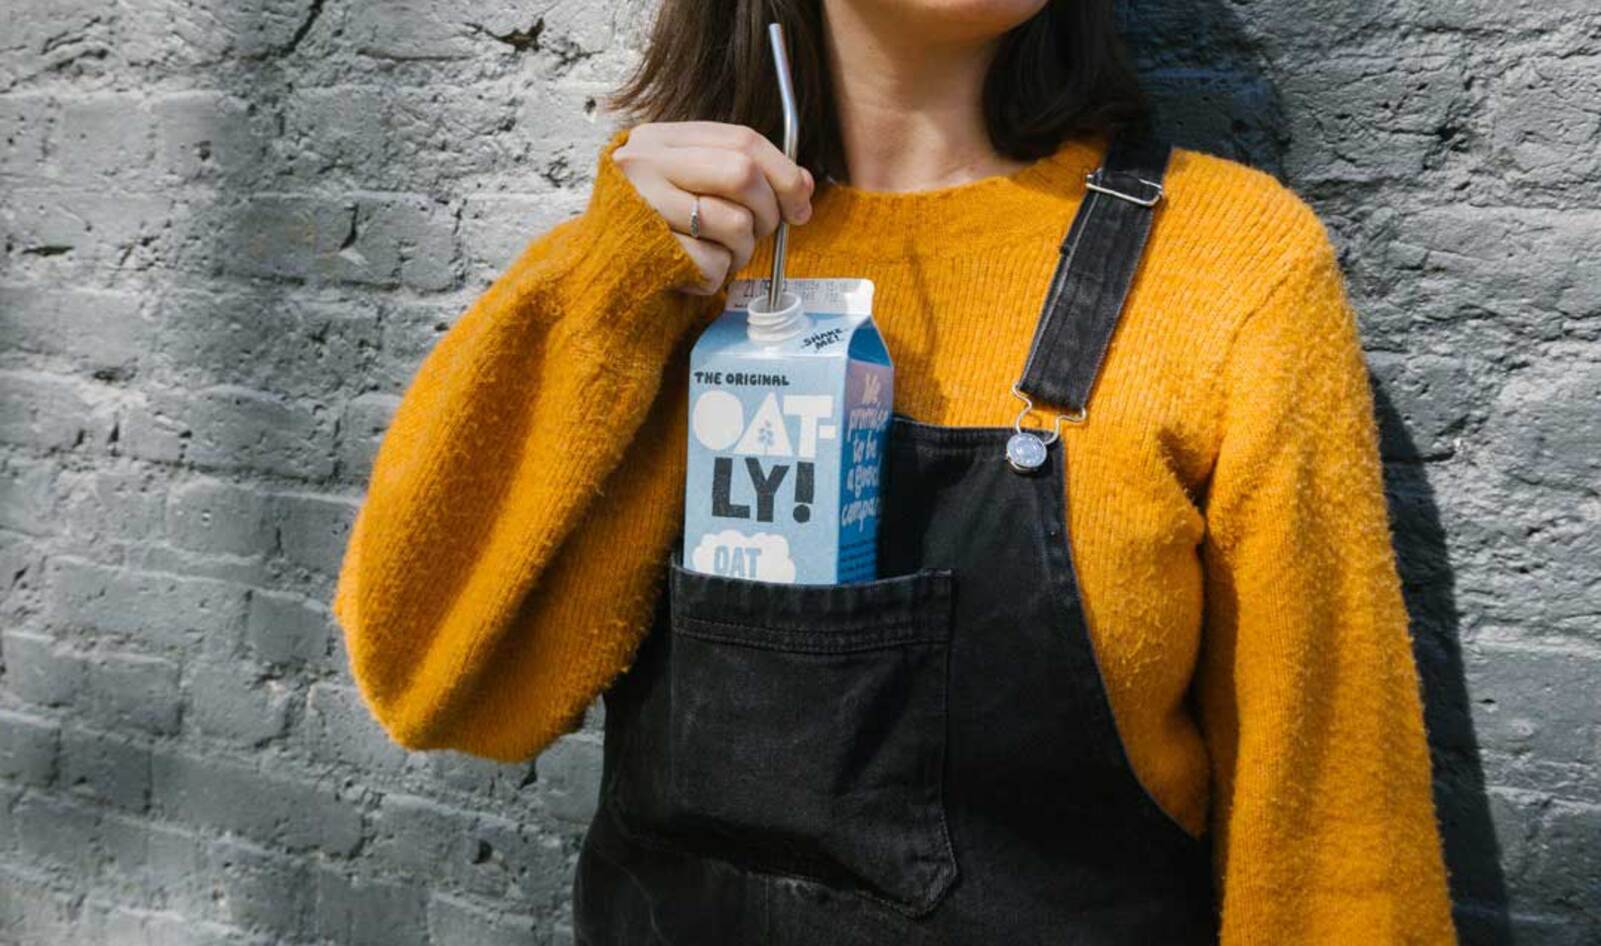 Vegan Oat Milk Brand Oatly to IPO This Year, Sources Say